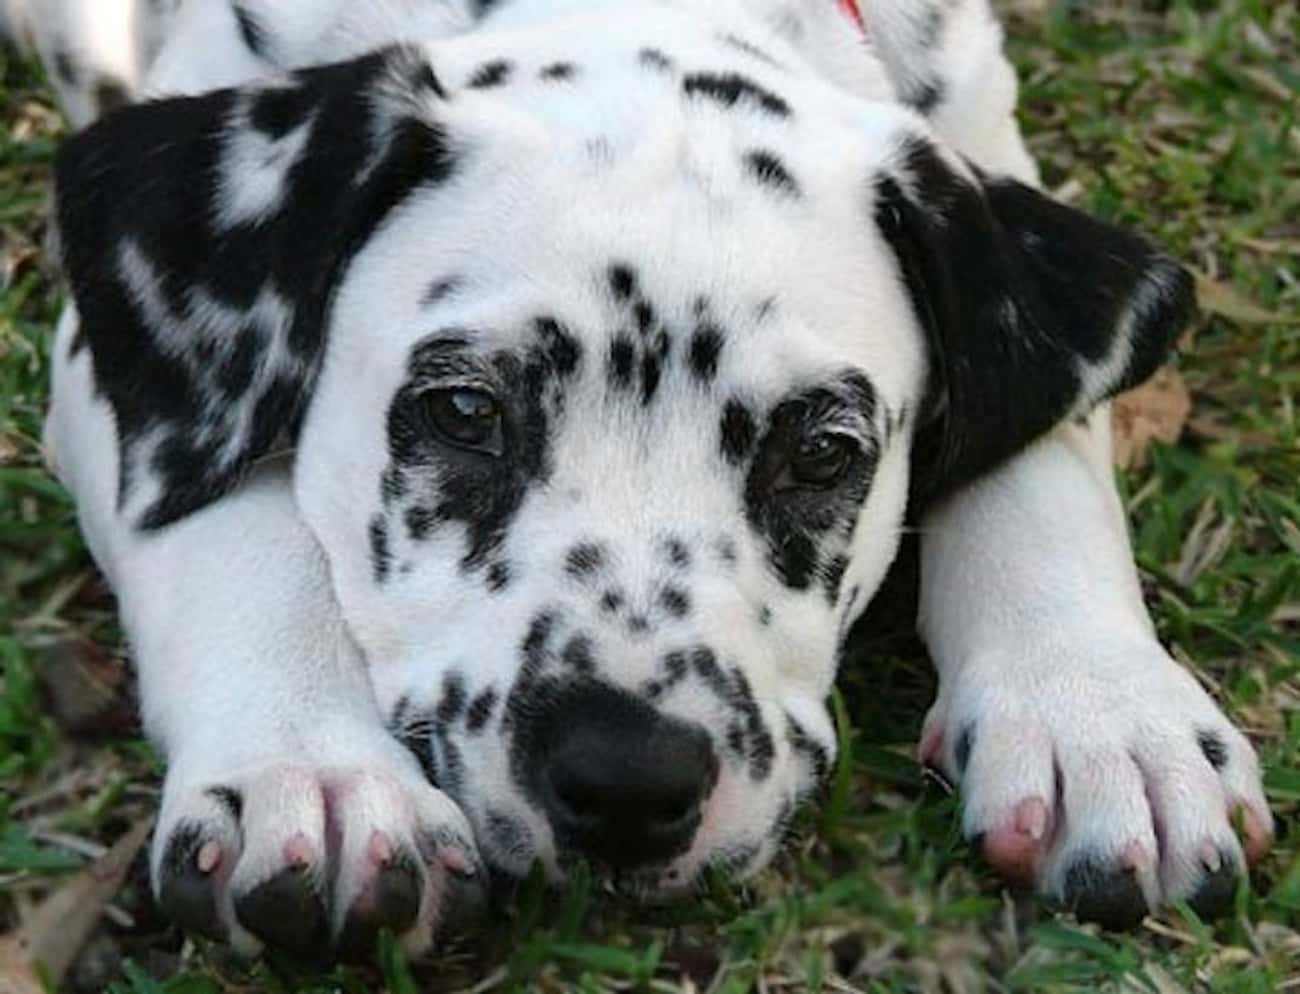 Dalmatian Pup Lounging in the Grass